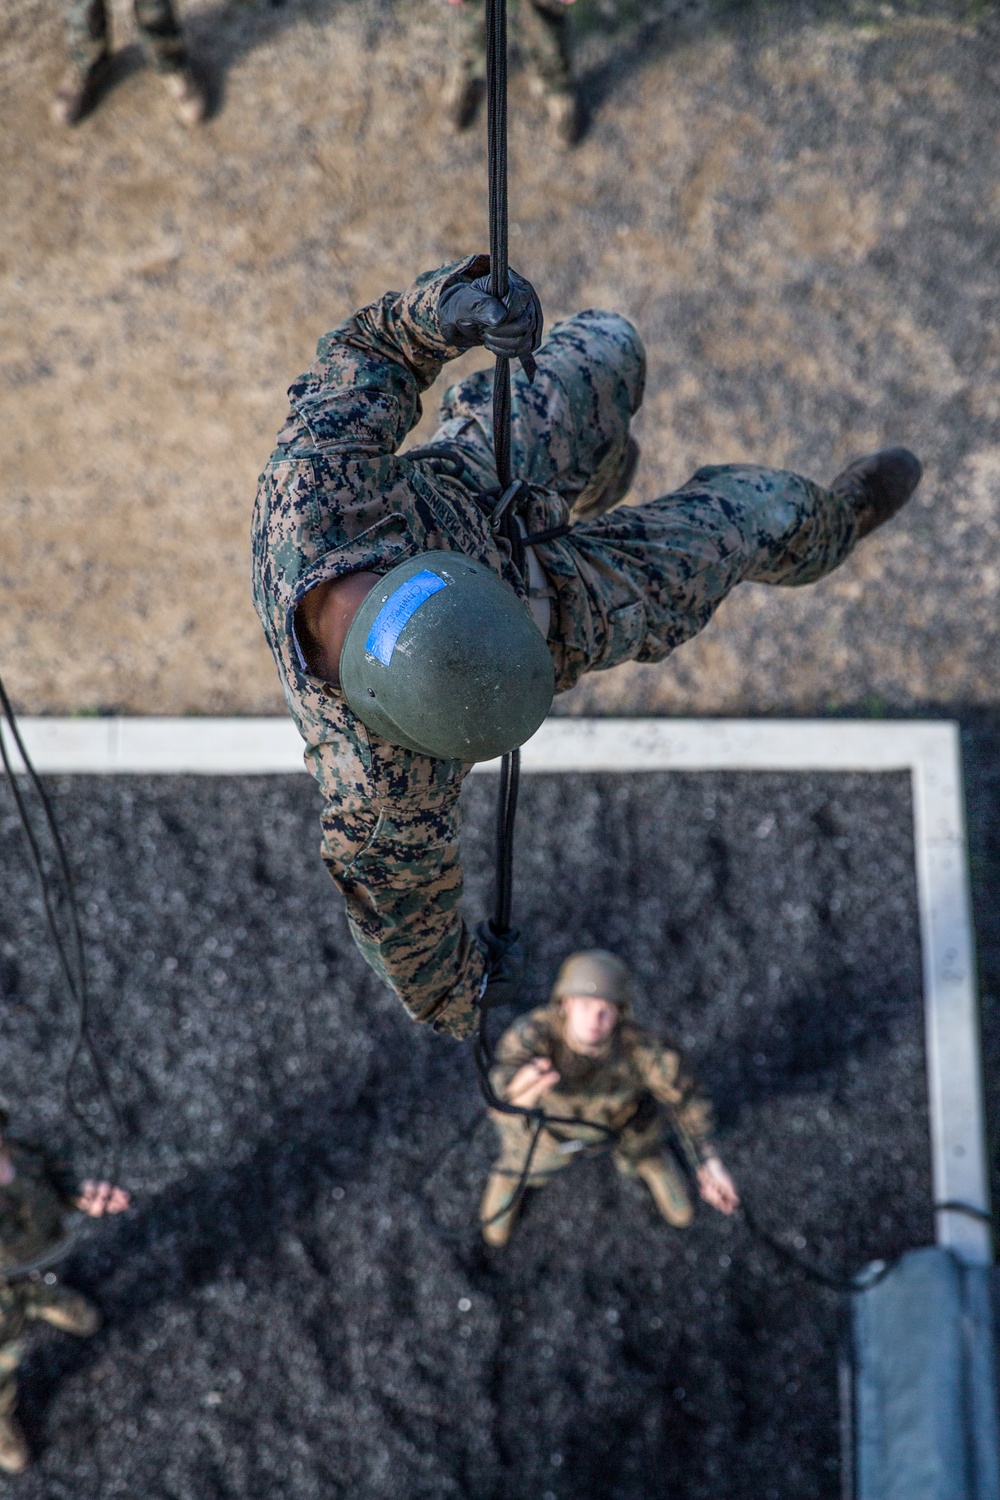 Basic Reconnaissance Course 2-20 conducts helicopter rope suspension techniques training